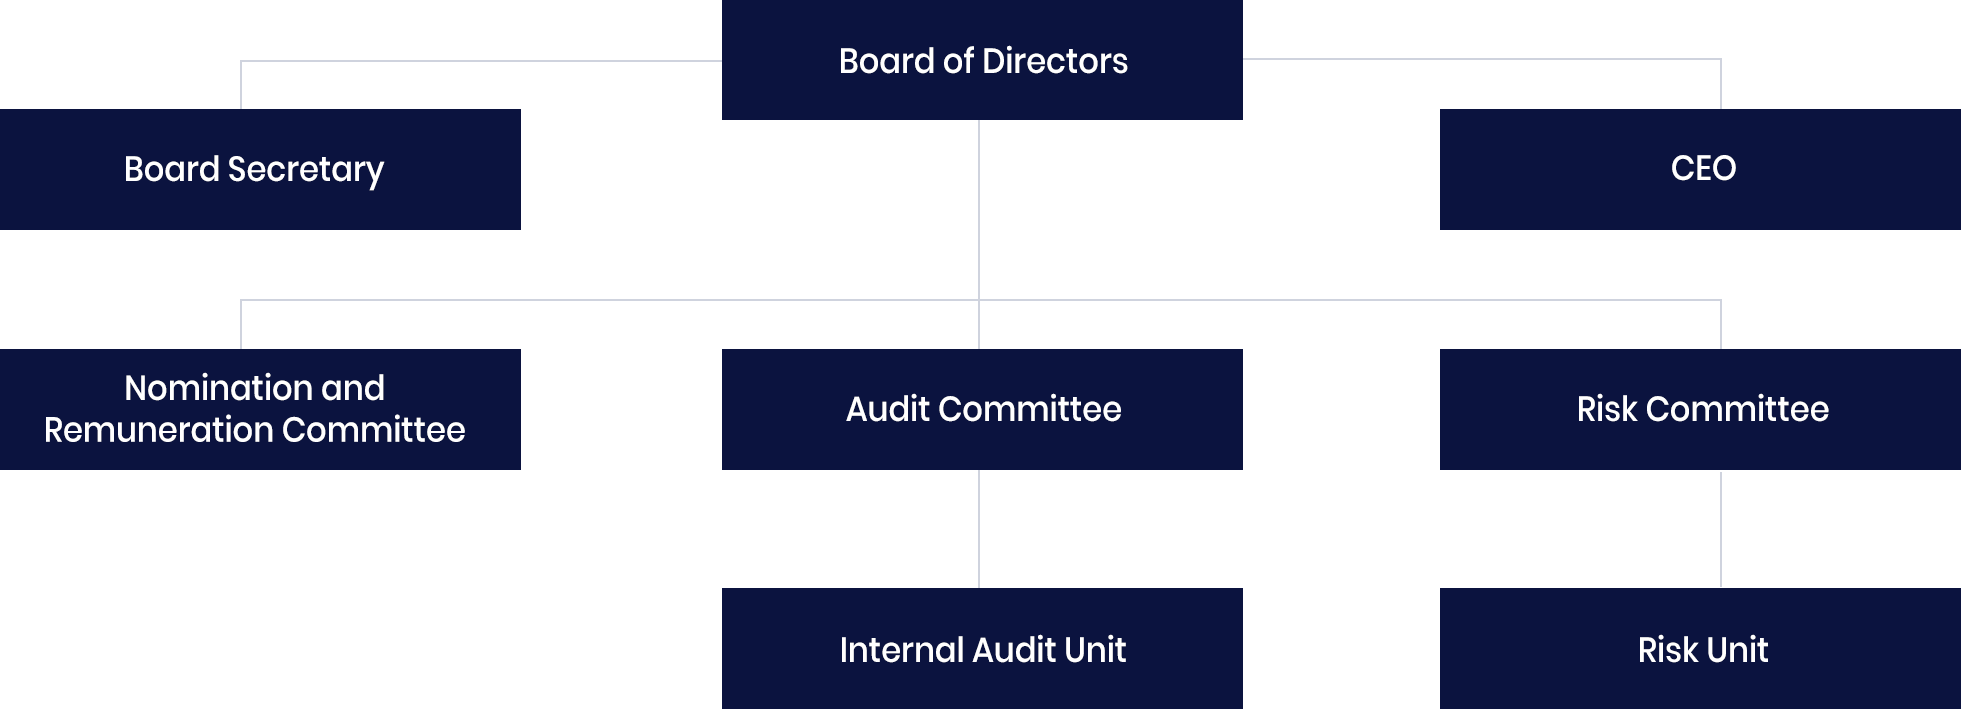 The Board of Directors consists of CEO, Board Secretary and Board Committees.